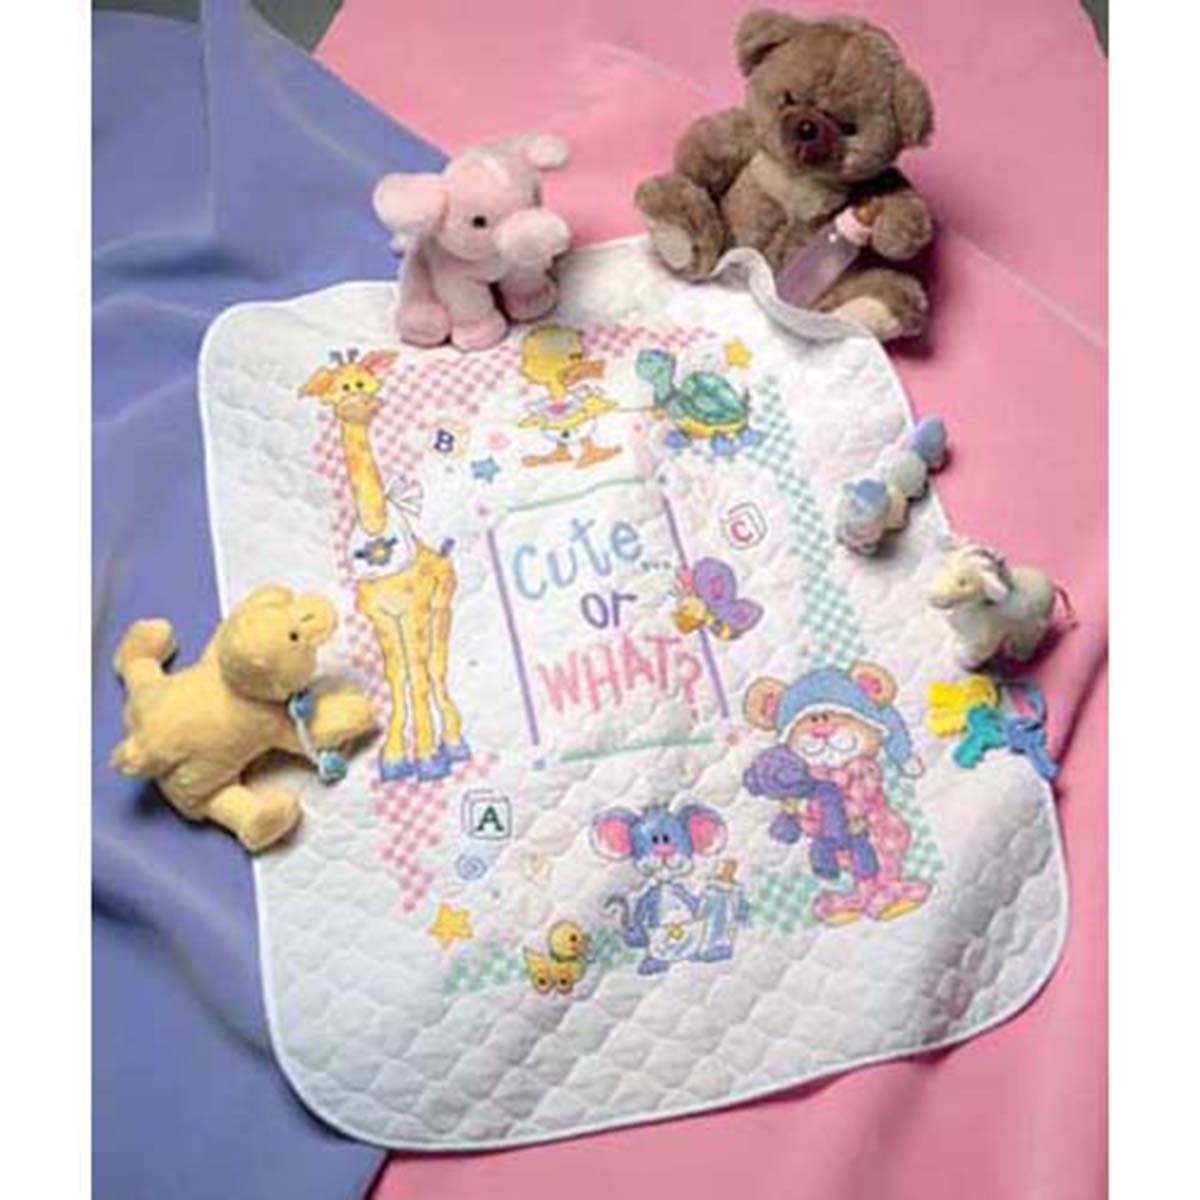 Toys Stamped Quilt Cross Stitch Kit